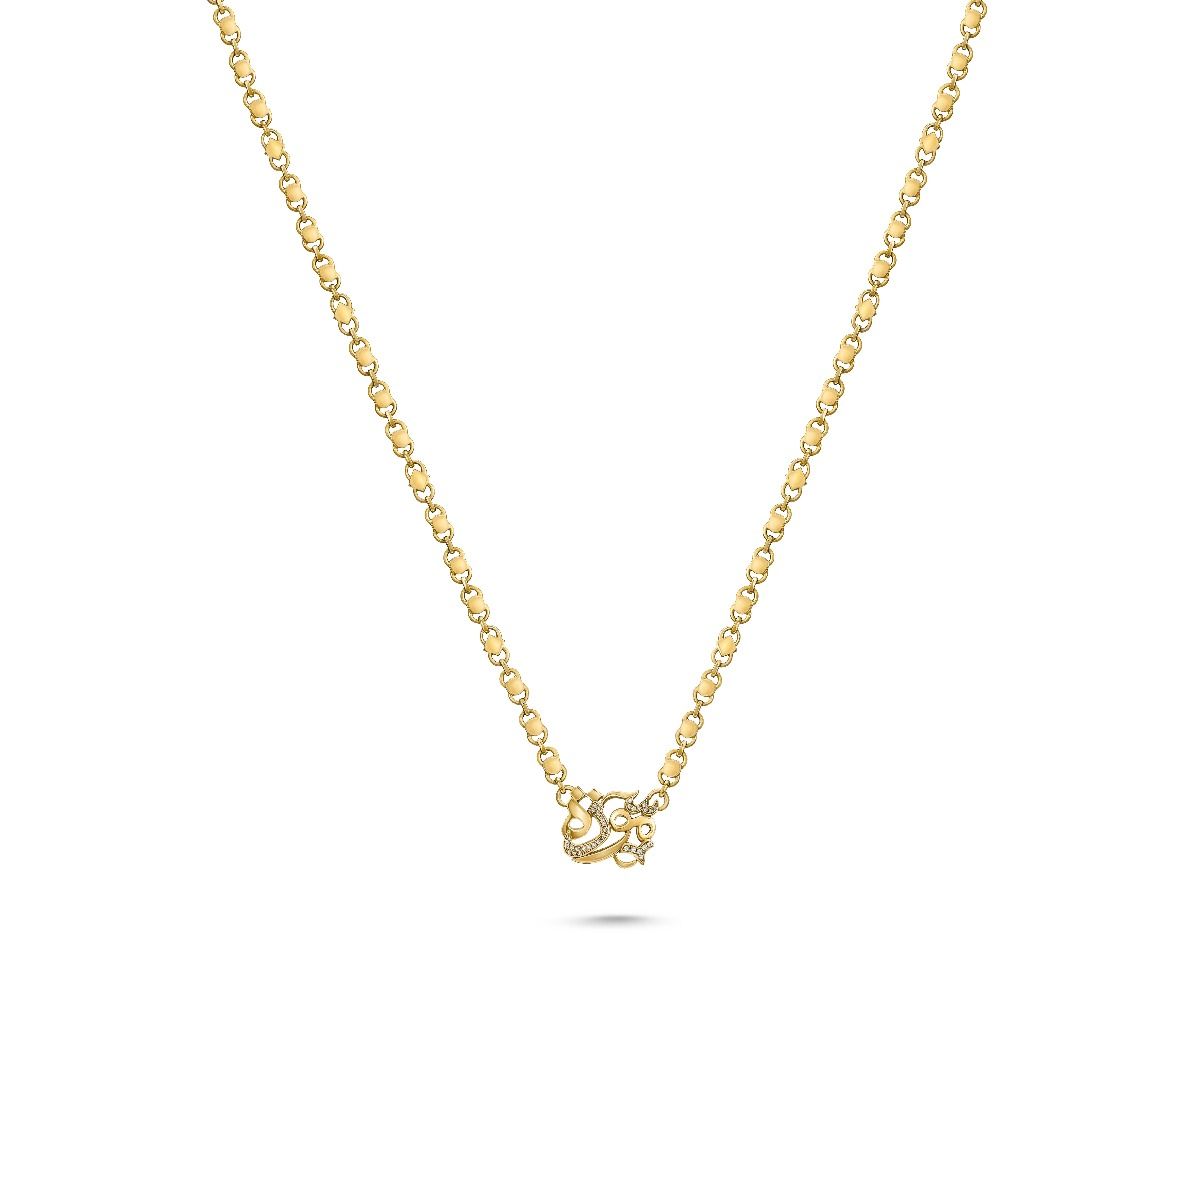 Gold Endearment Necklace by Azza Fahmy - Designer Necklaces